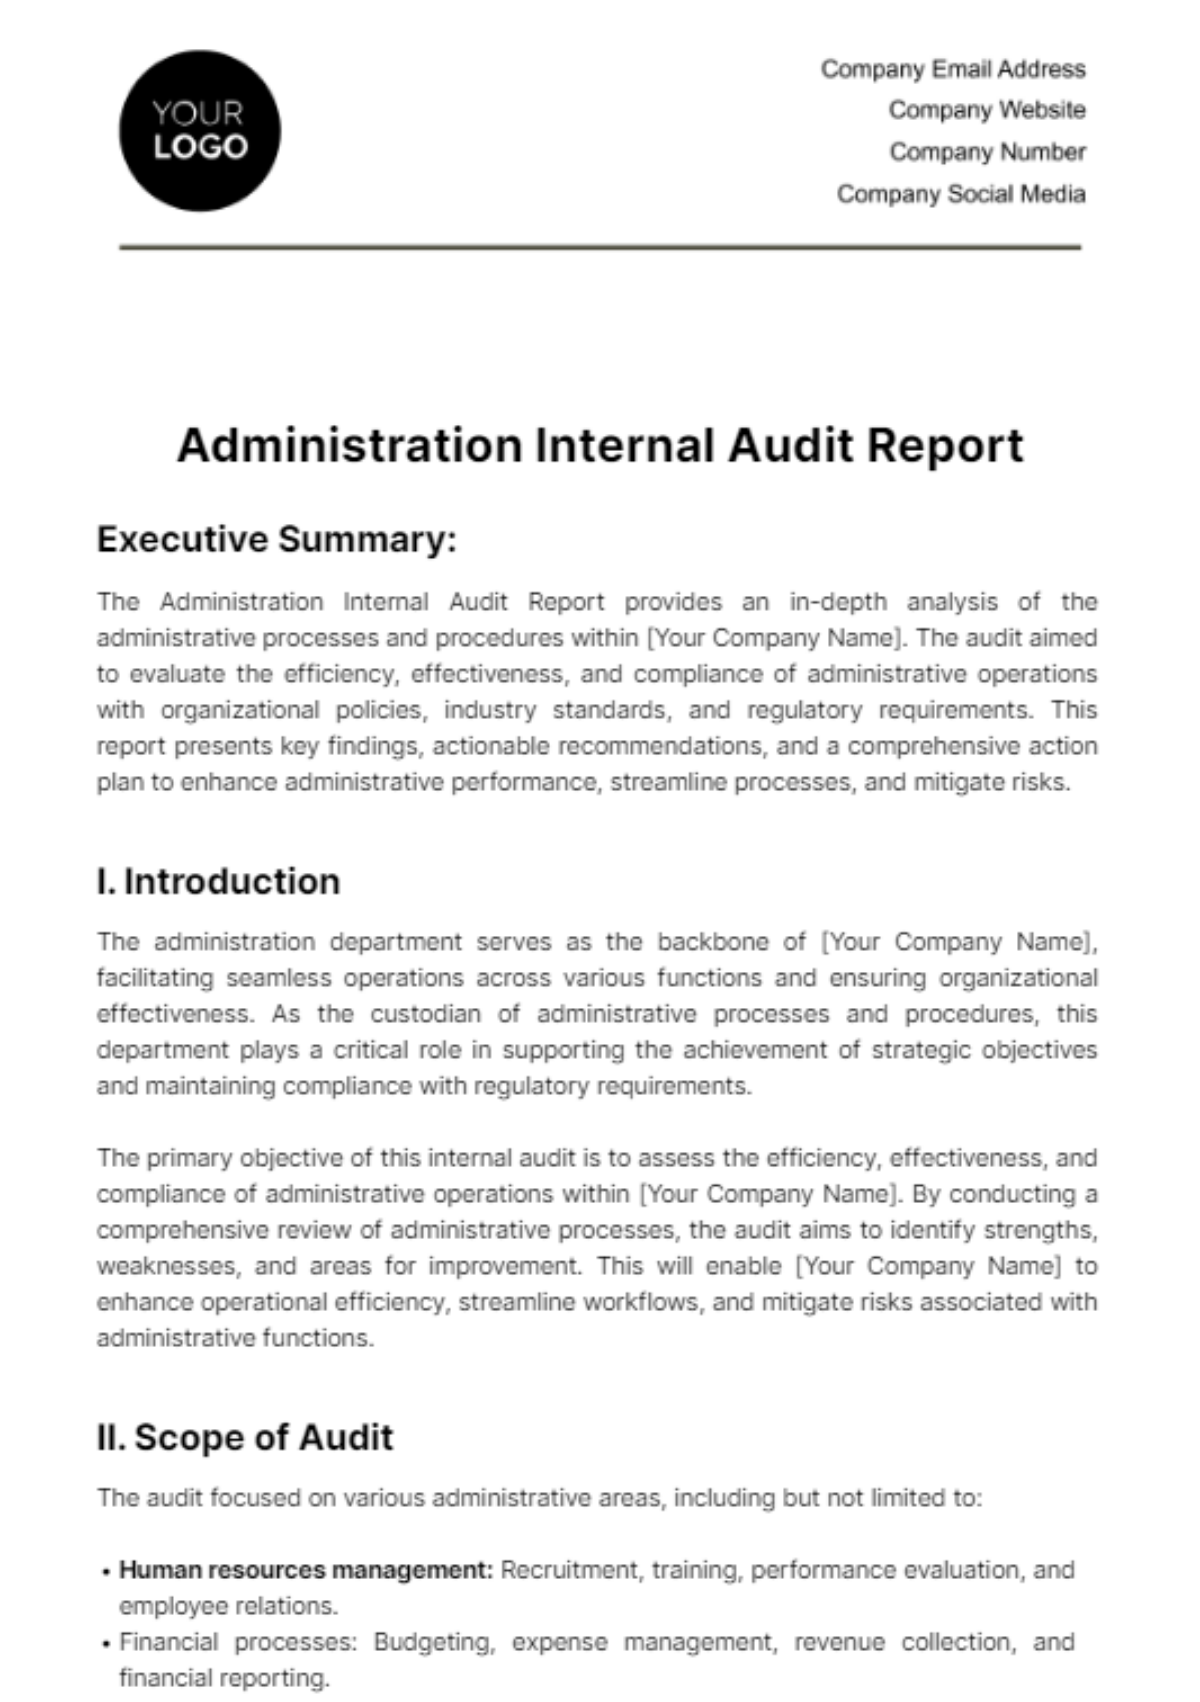 Free Administration Internal Audit Report Template